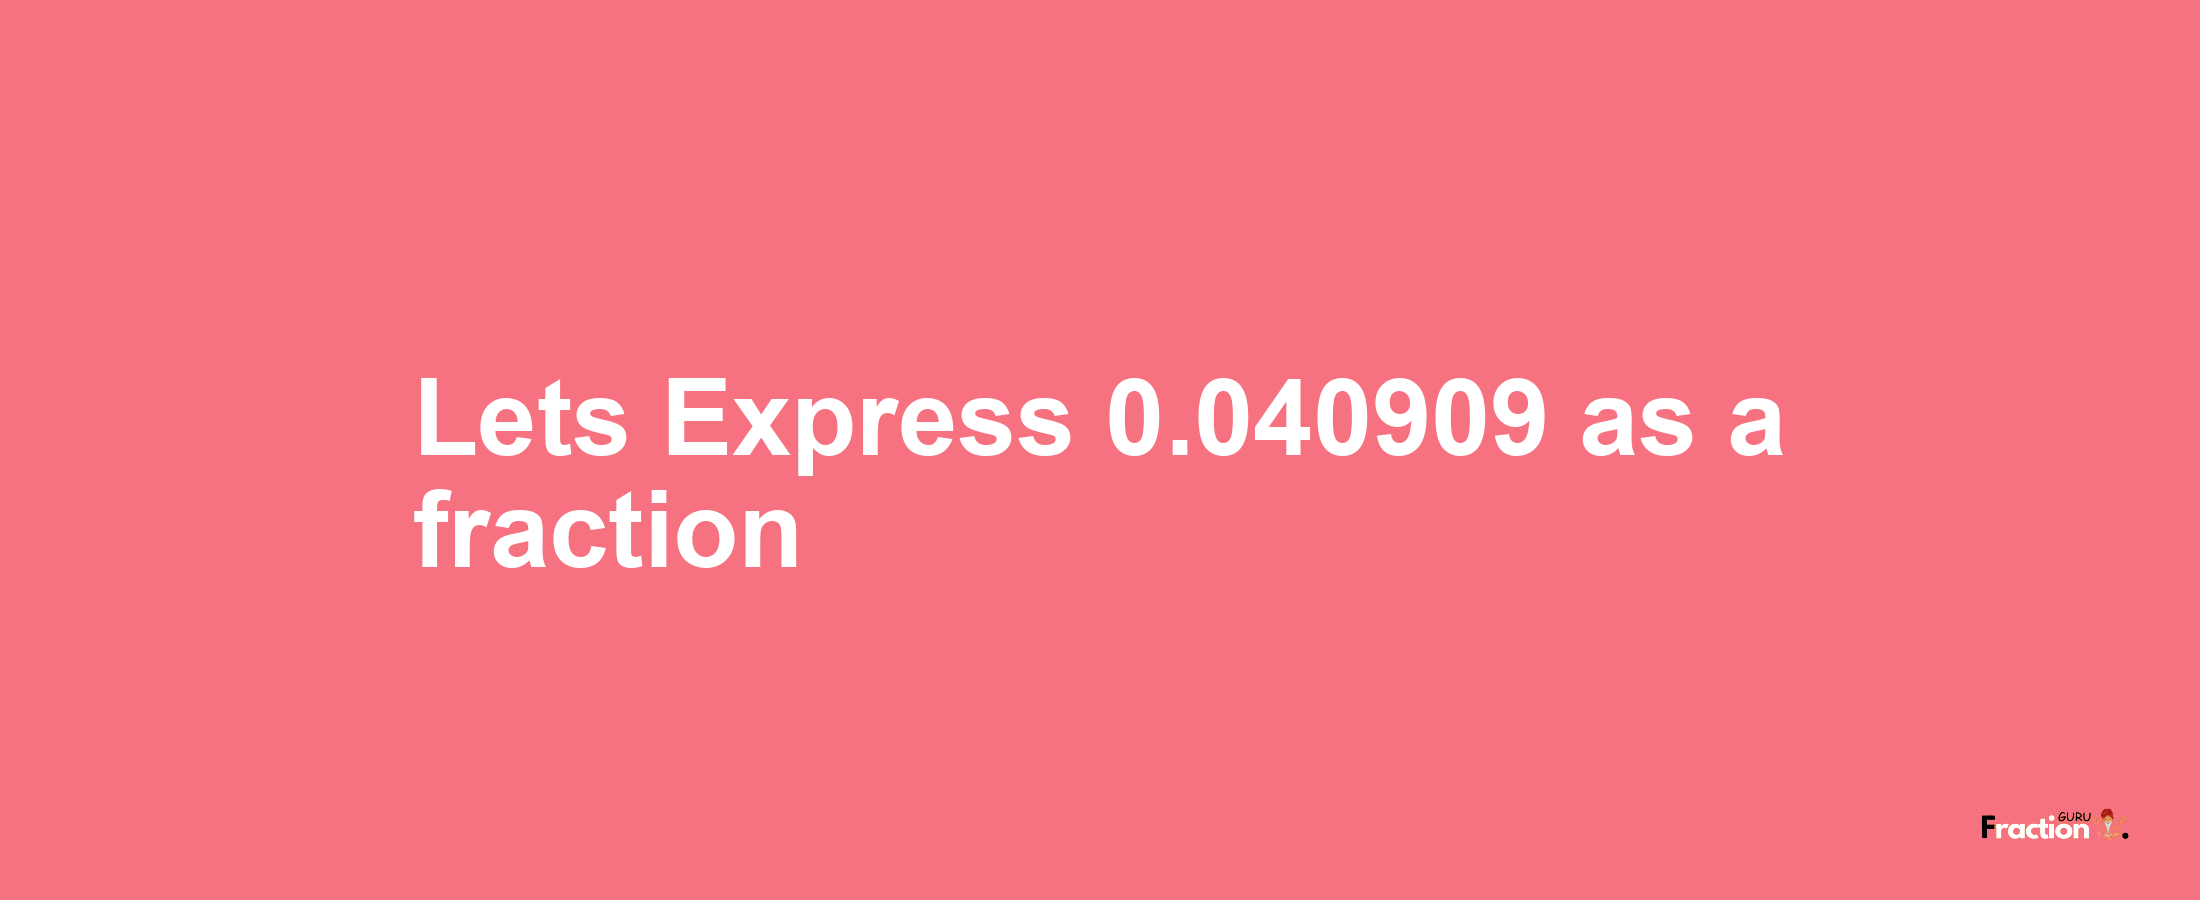 Lets Express 0.040909 as afraction